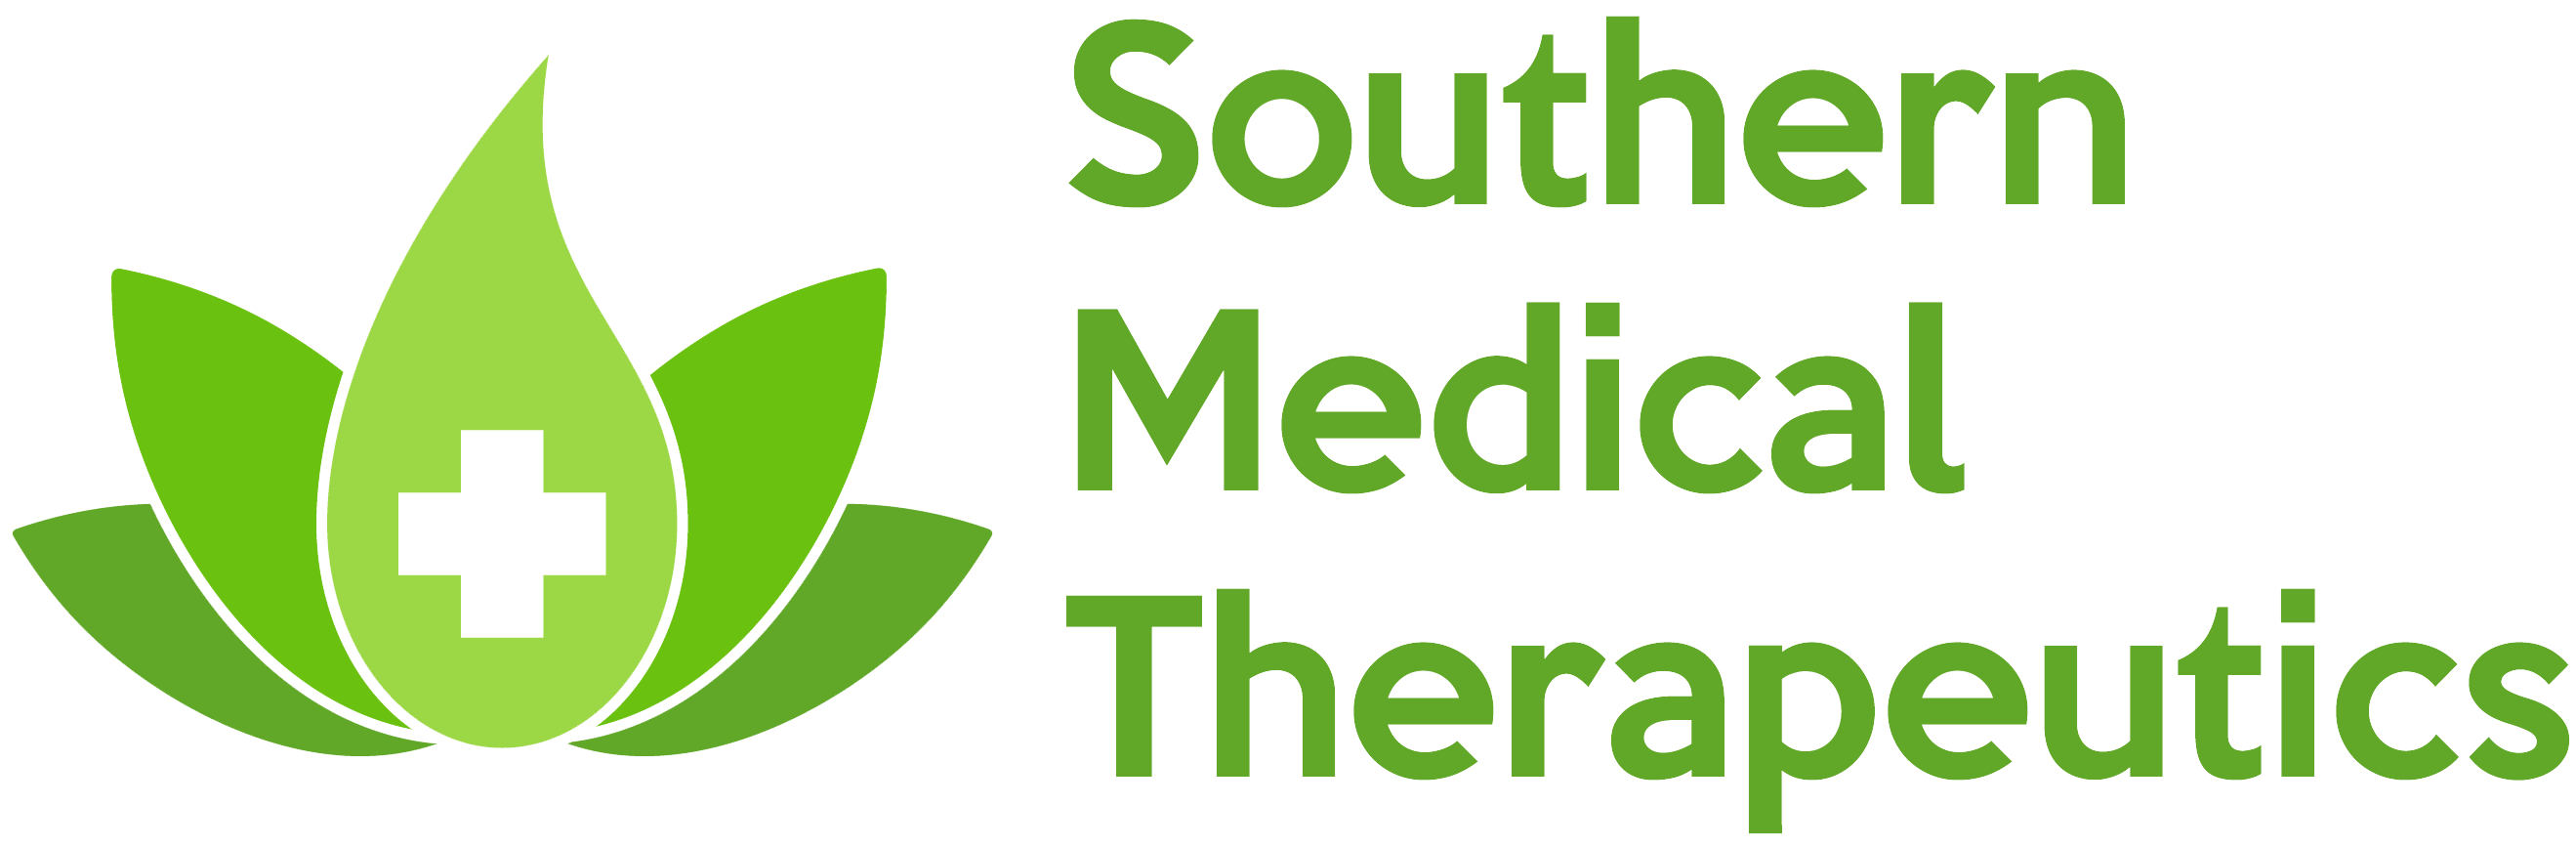 Southern Medical Therapeutics